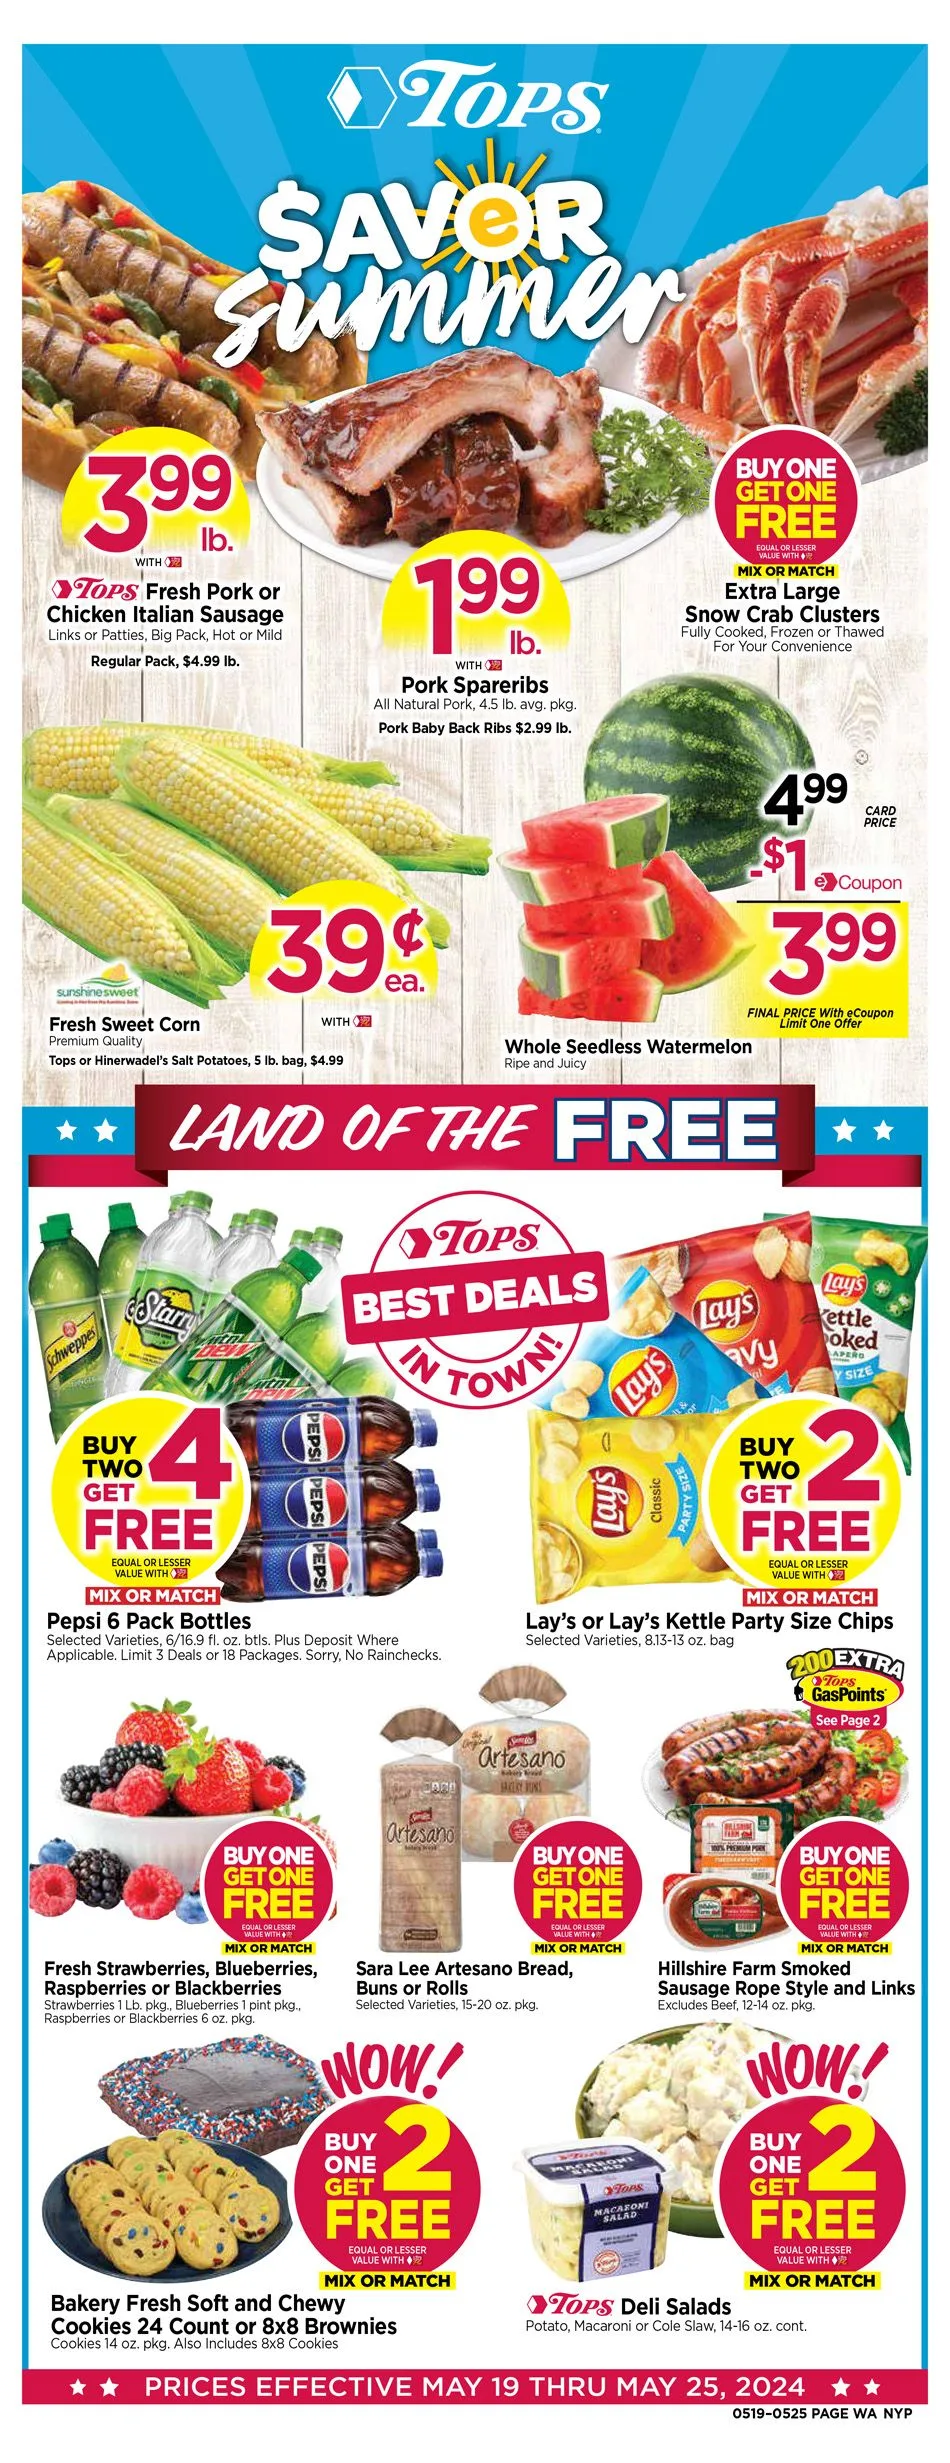 Tops Weekly Ad 5_19_24 pg 1